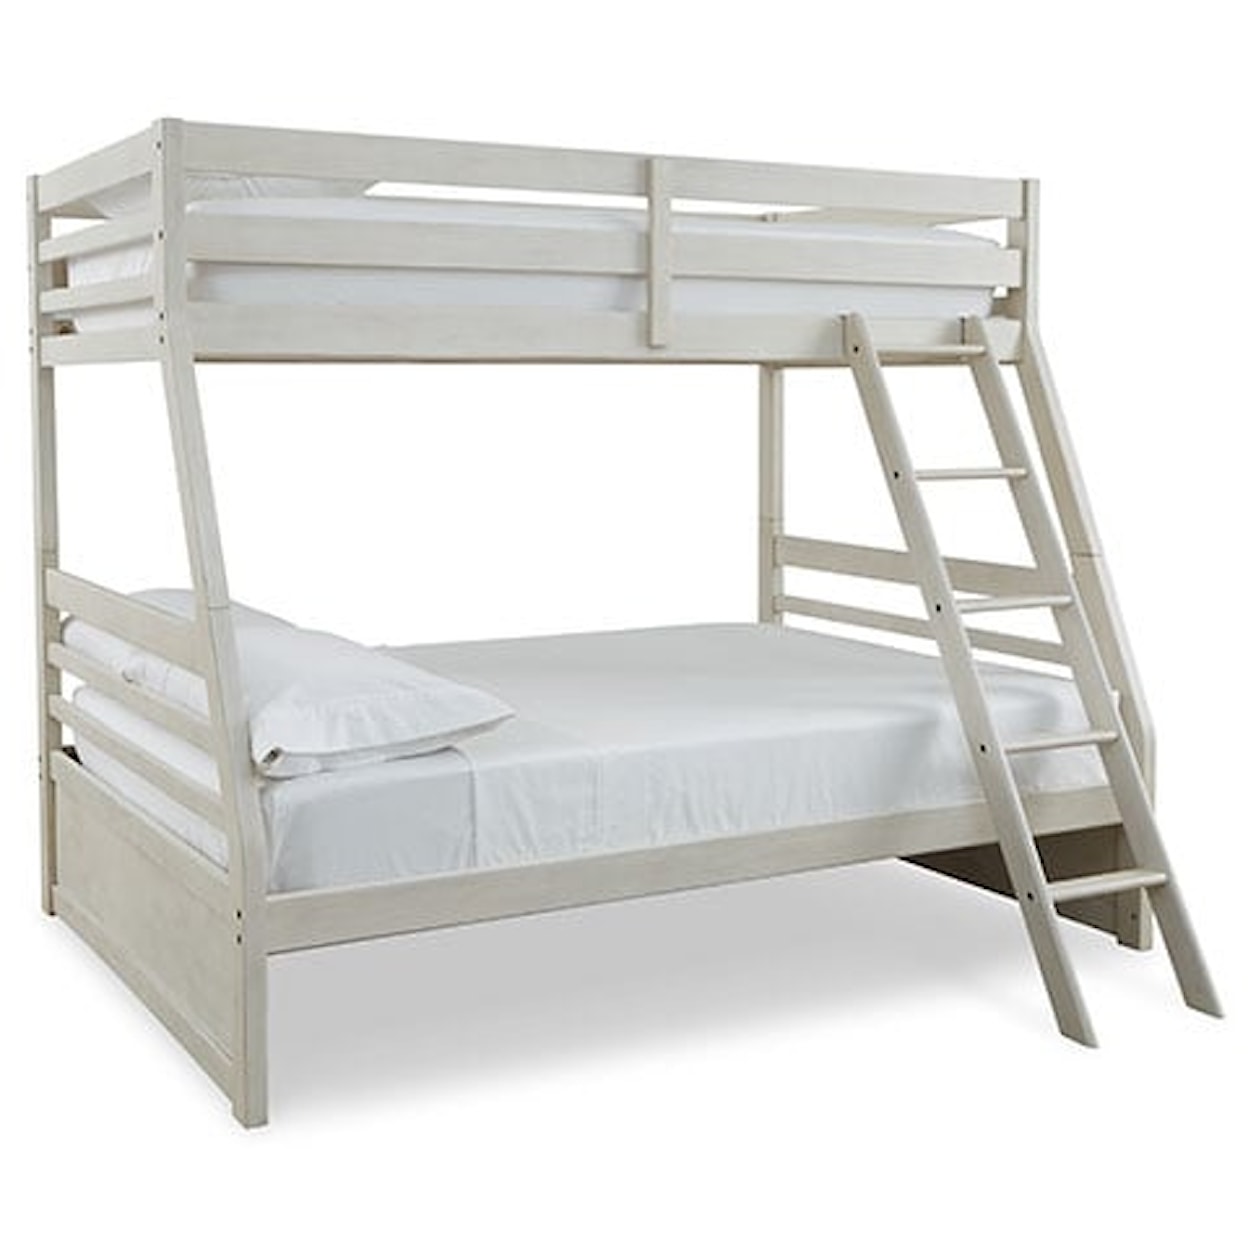 Signature Robbinsdale Twin/Full Bunk Bed